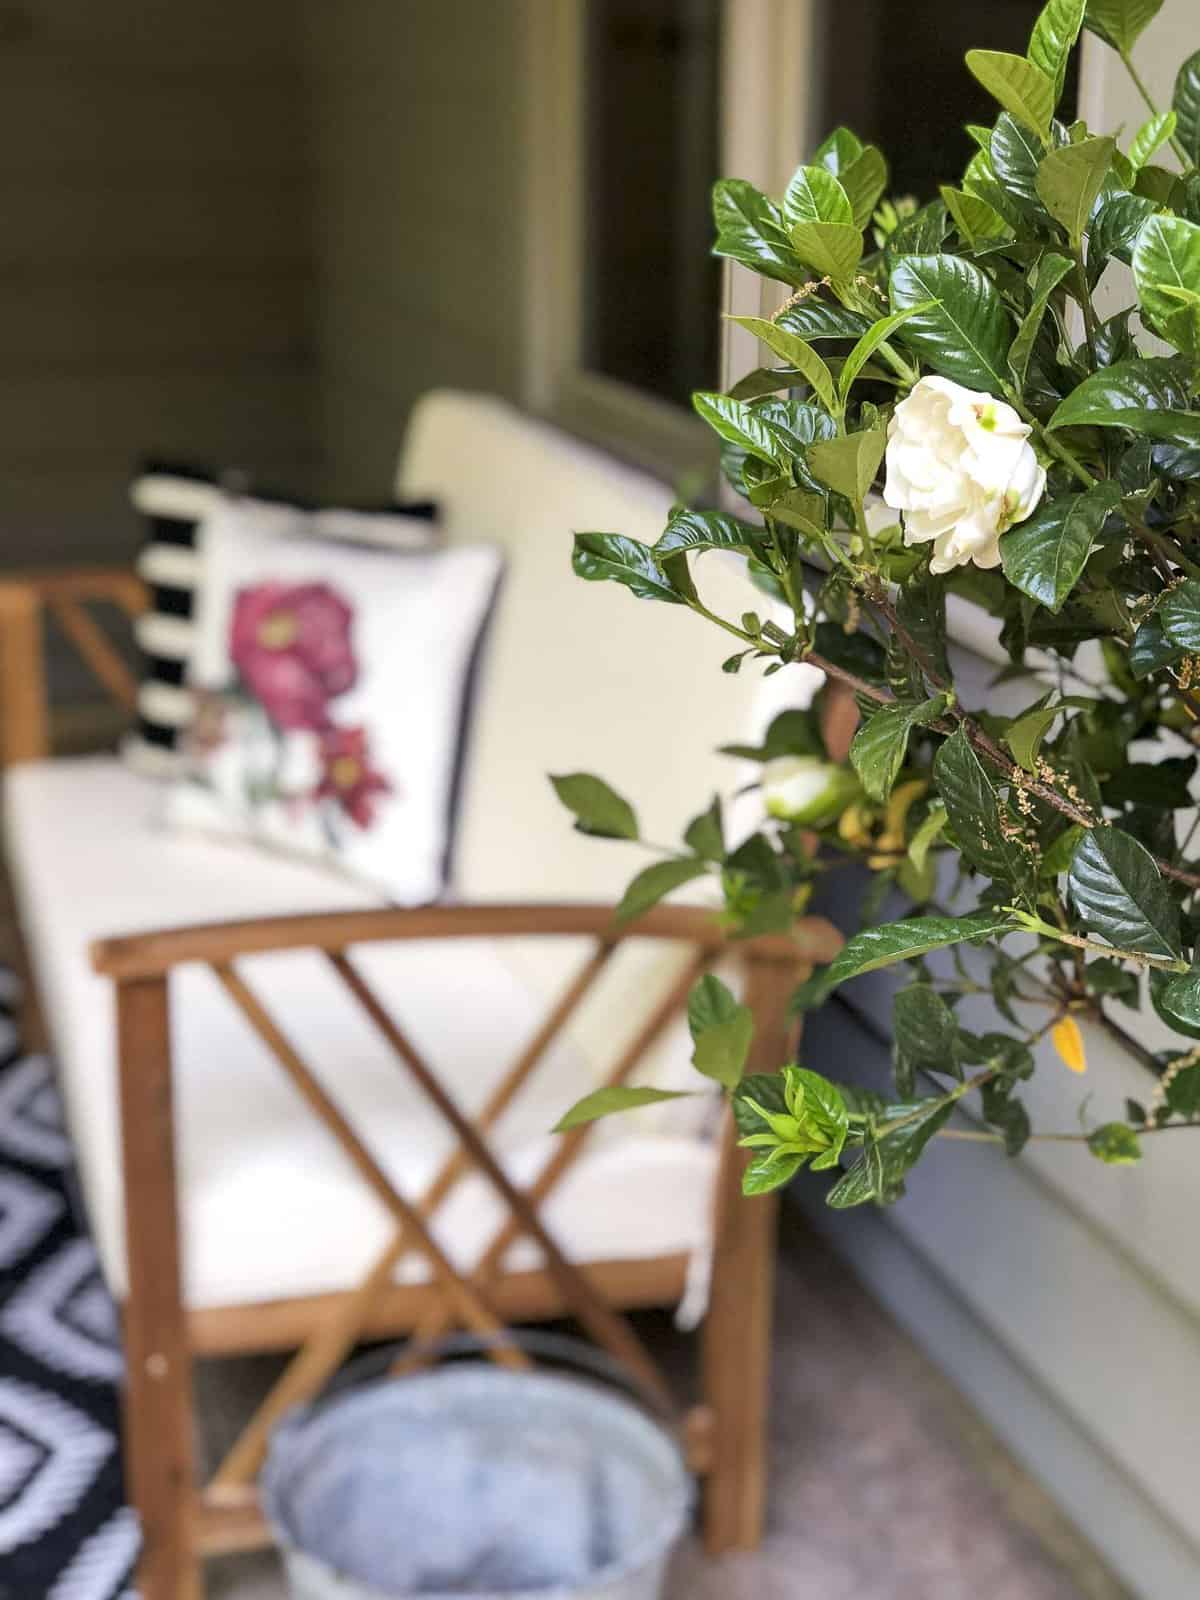 Are you looking for easy updates to make your outdoor living space more livable? Today I'm giving you five ways to update your outdoor living space to make it an enjoyable oasis to enjoy all summer long and well into the fall. Read more for 5 easy tips!